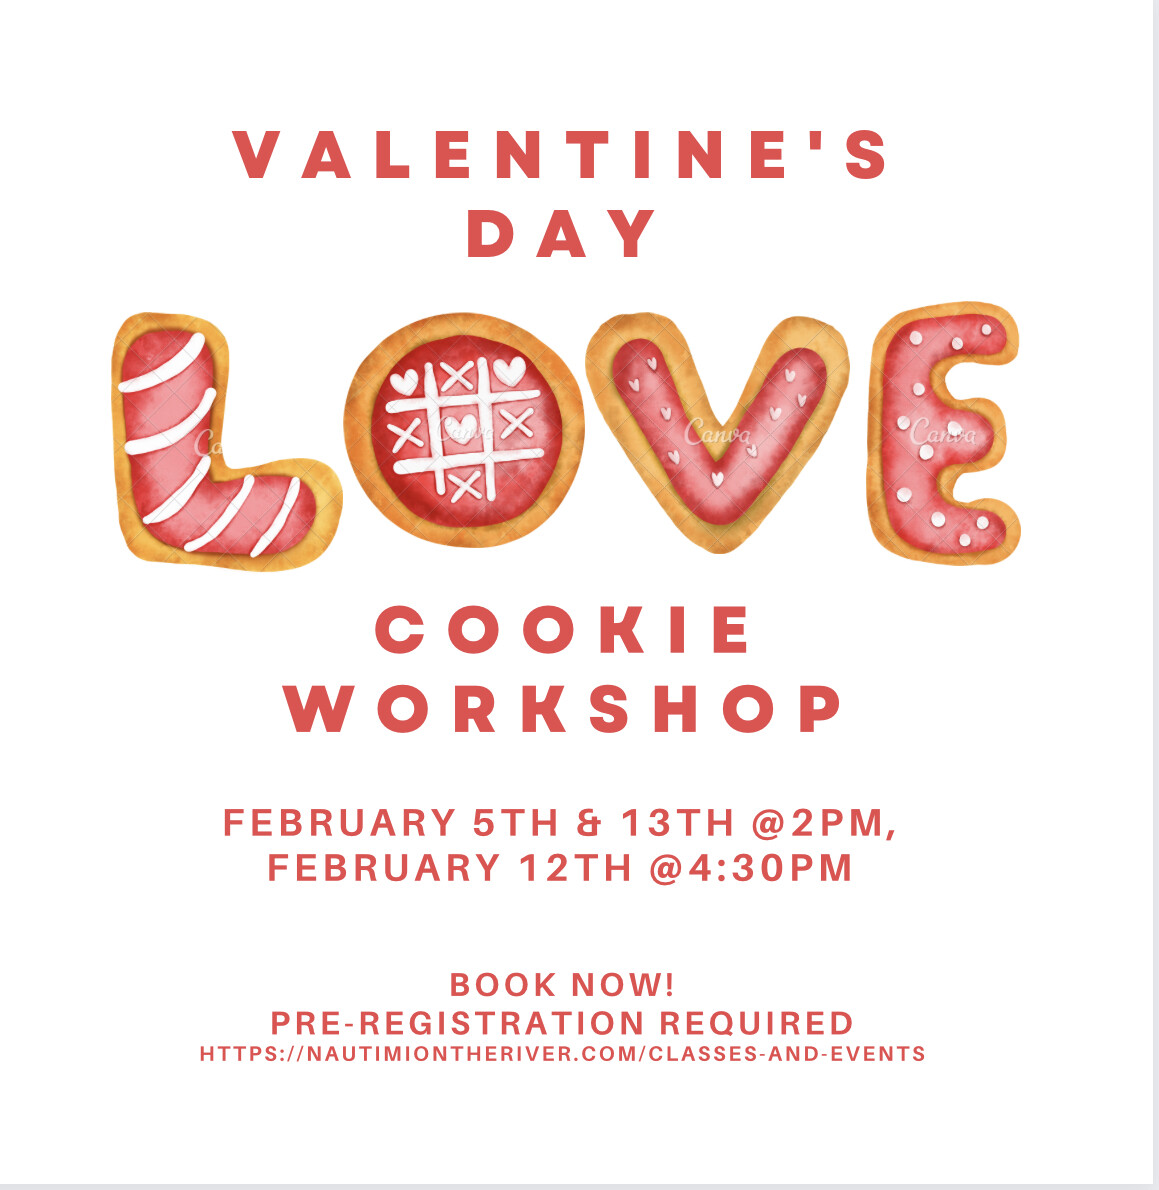 Valentine's Day Cookie Workshop - February 12 @ 4:30PM